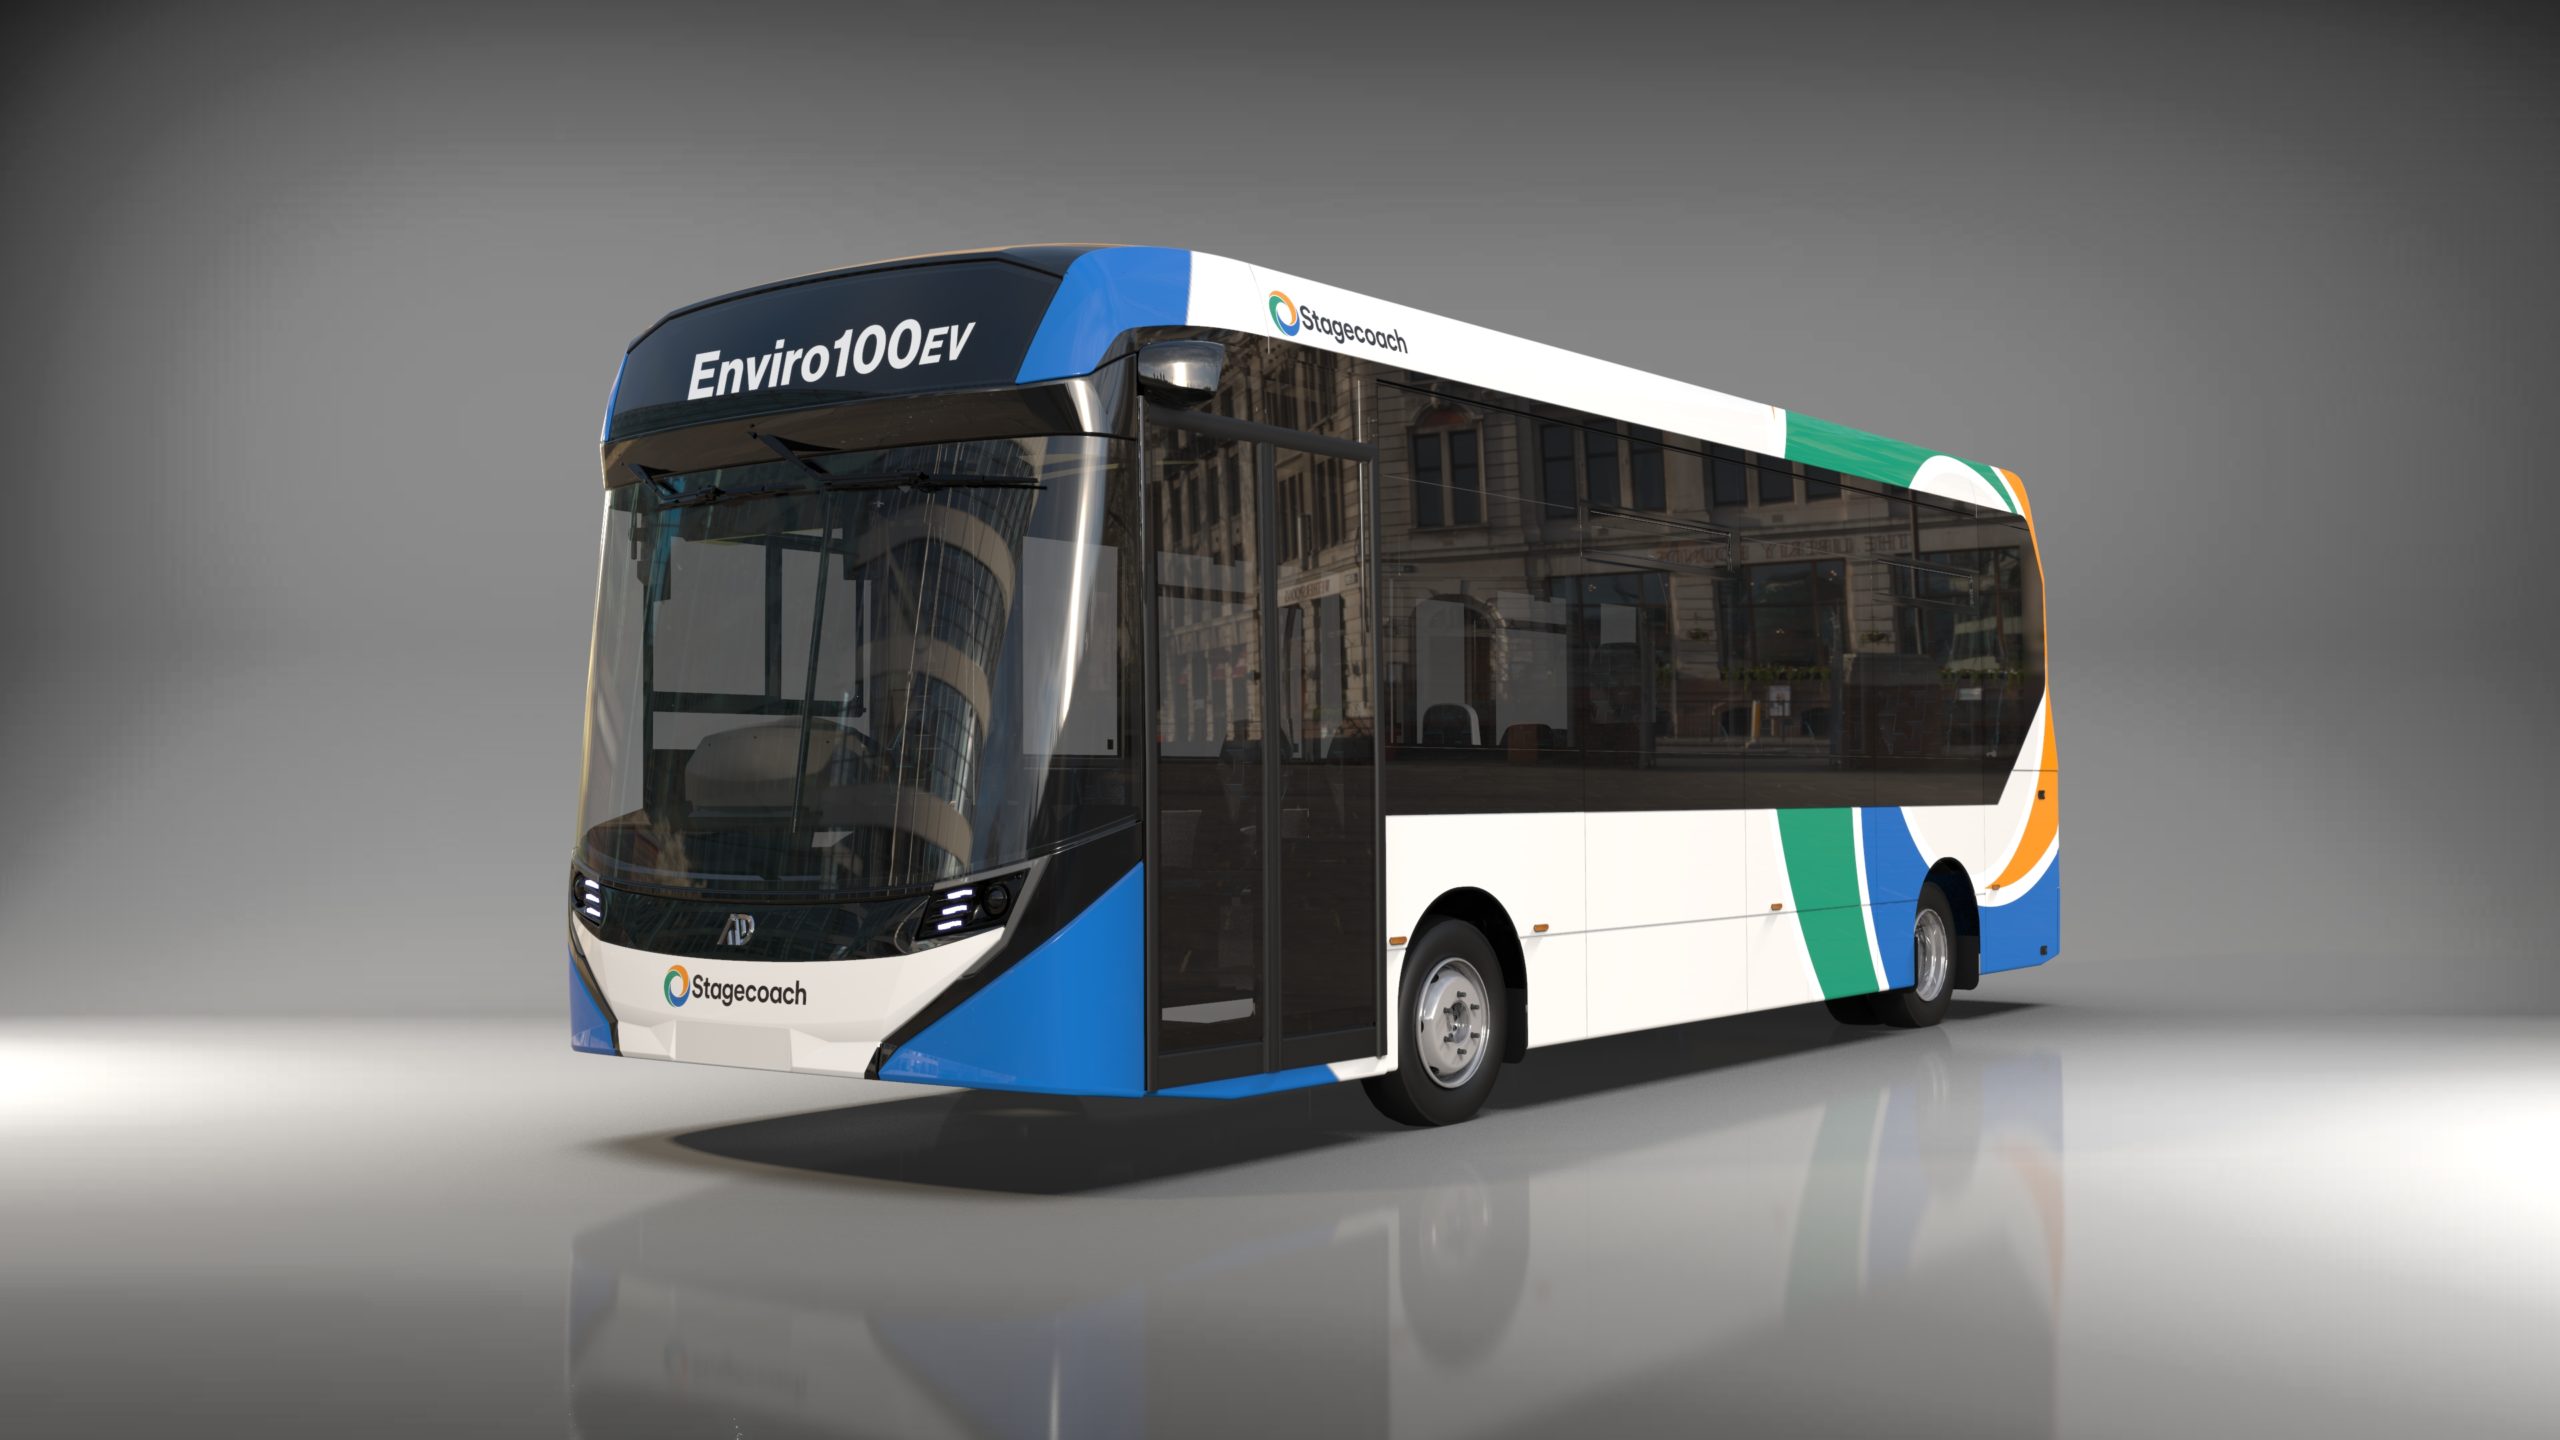 Stagecoach confirmed as launch customer for Enviro100EV